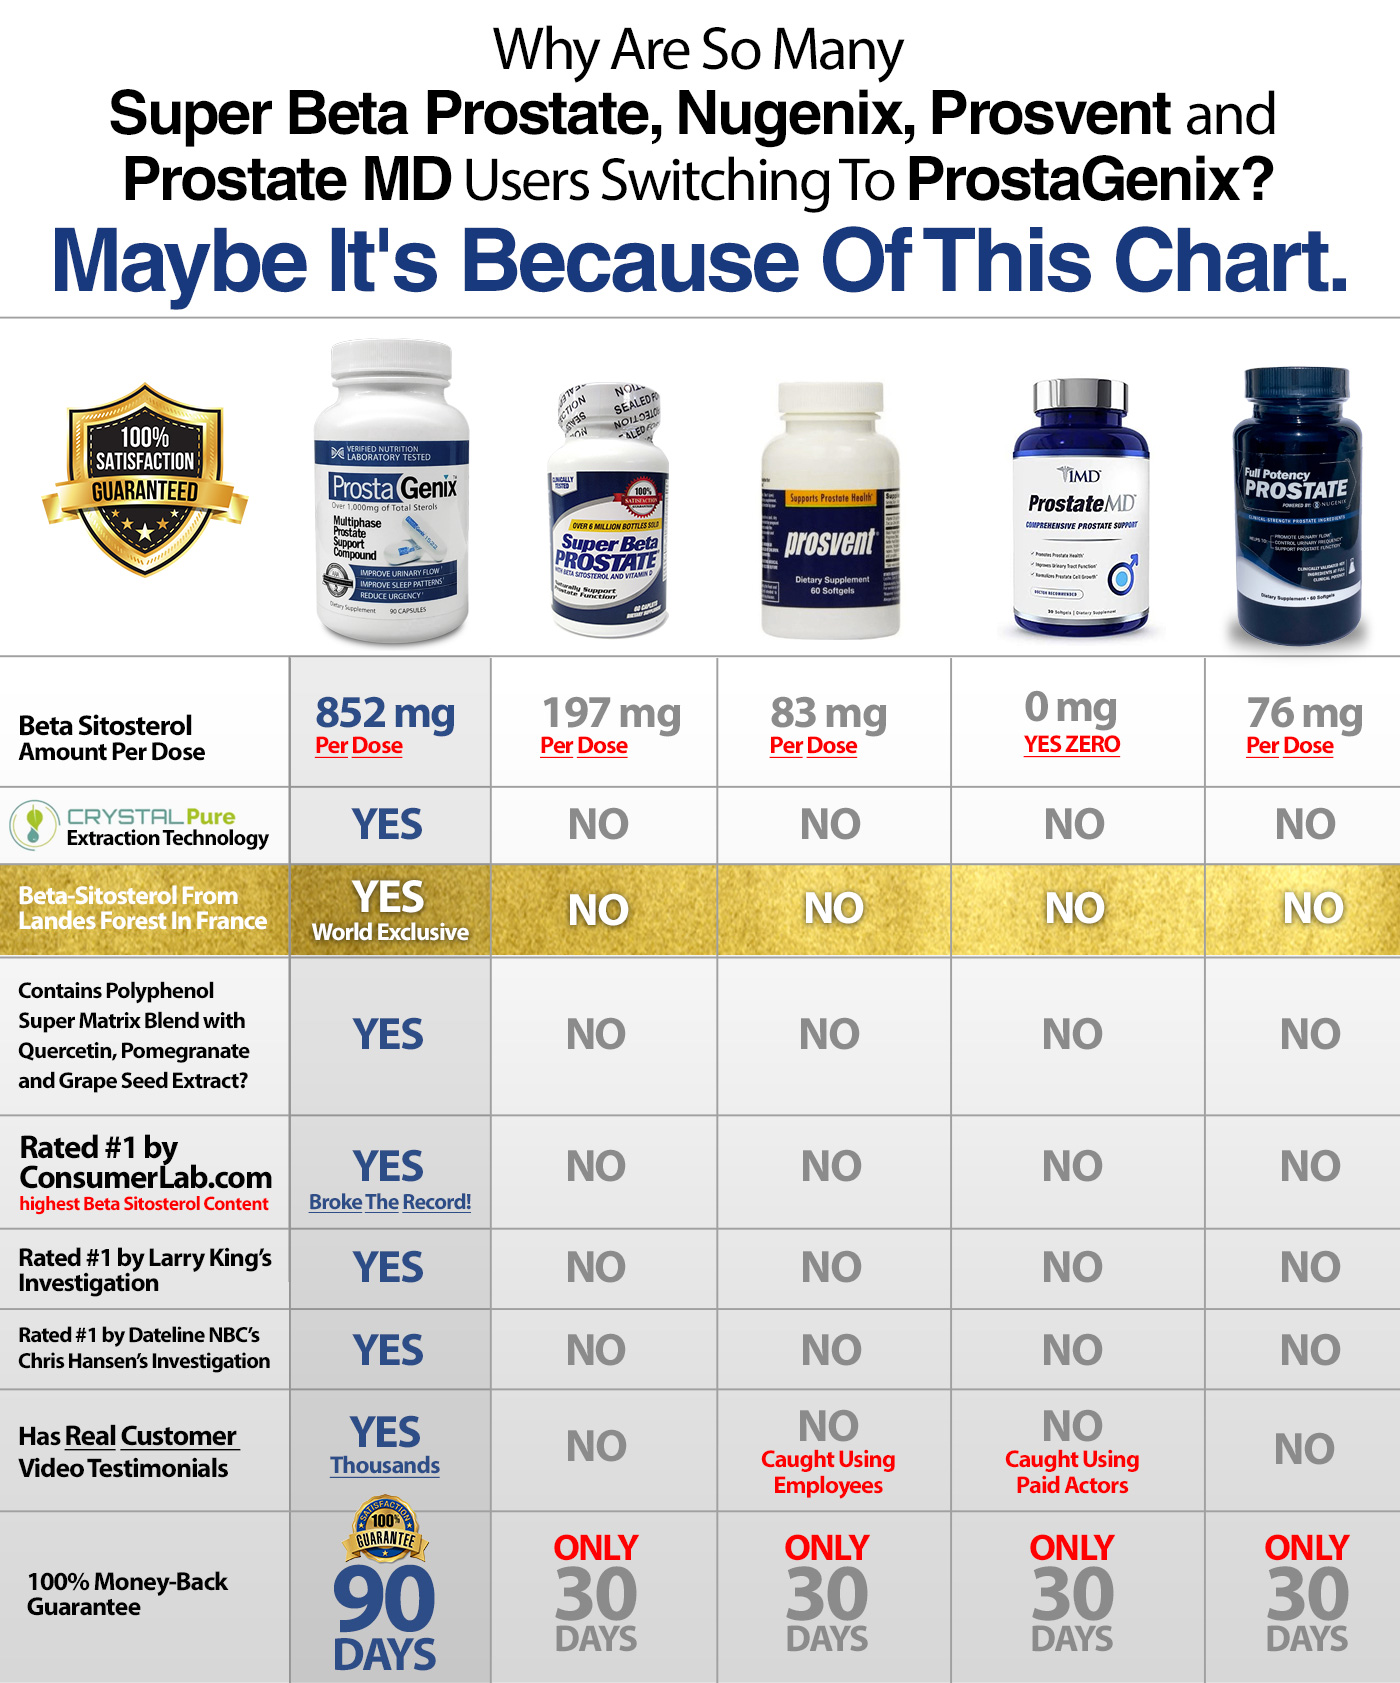 Why are so many Super Beta Prostate, Prosvent, Urinozinc, and Physicians Choice users switching to ProstaGenix?